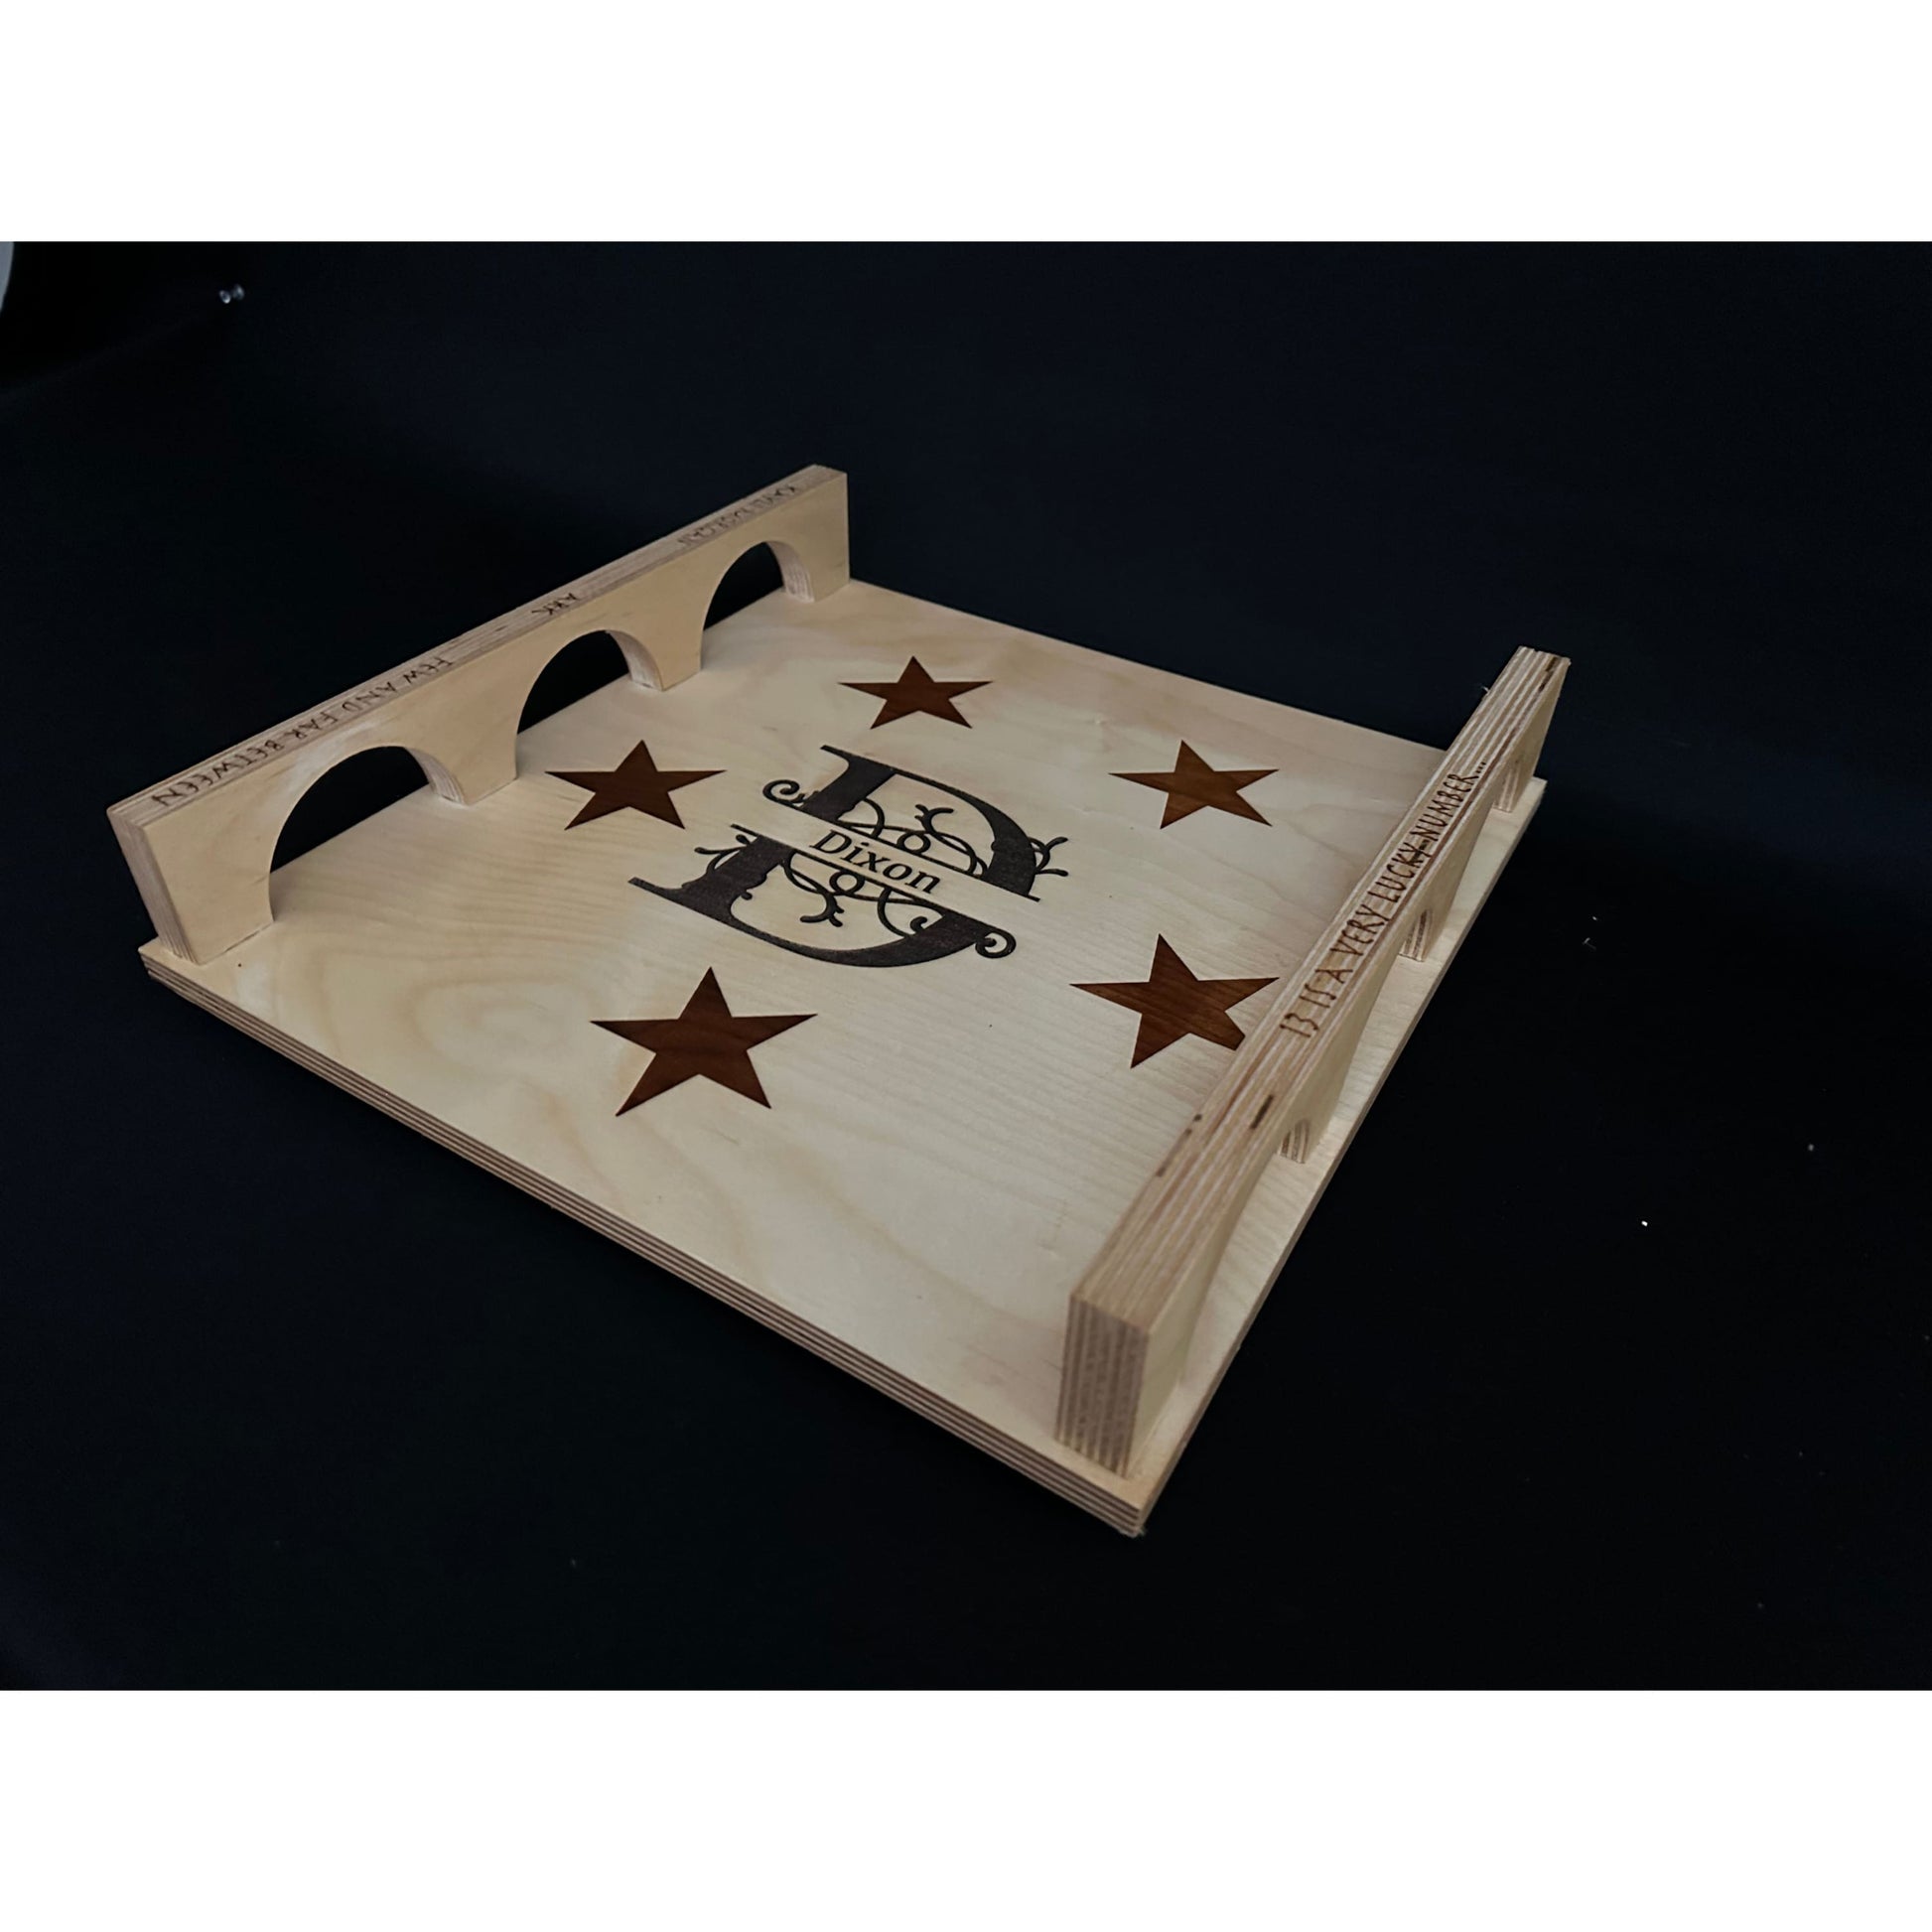 Serving Tray_Trivet_Cheese Slicer_Commissioned Designs